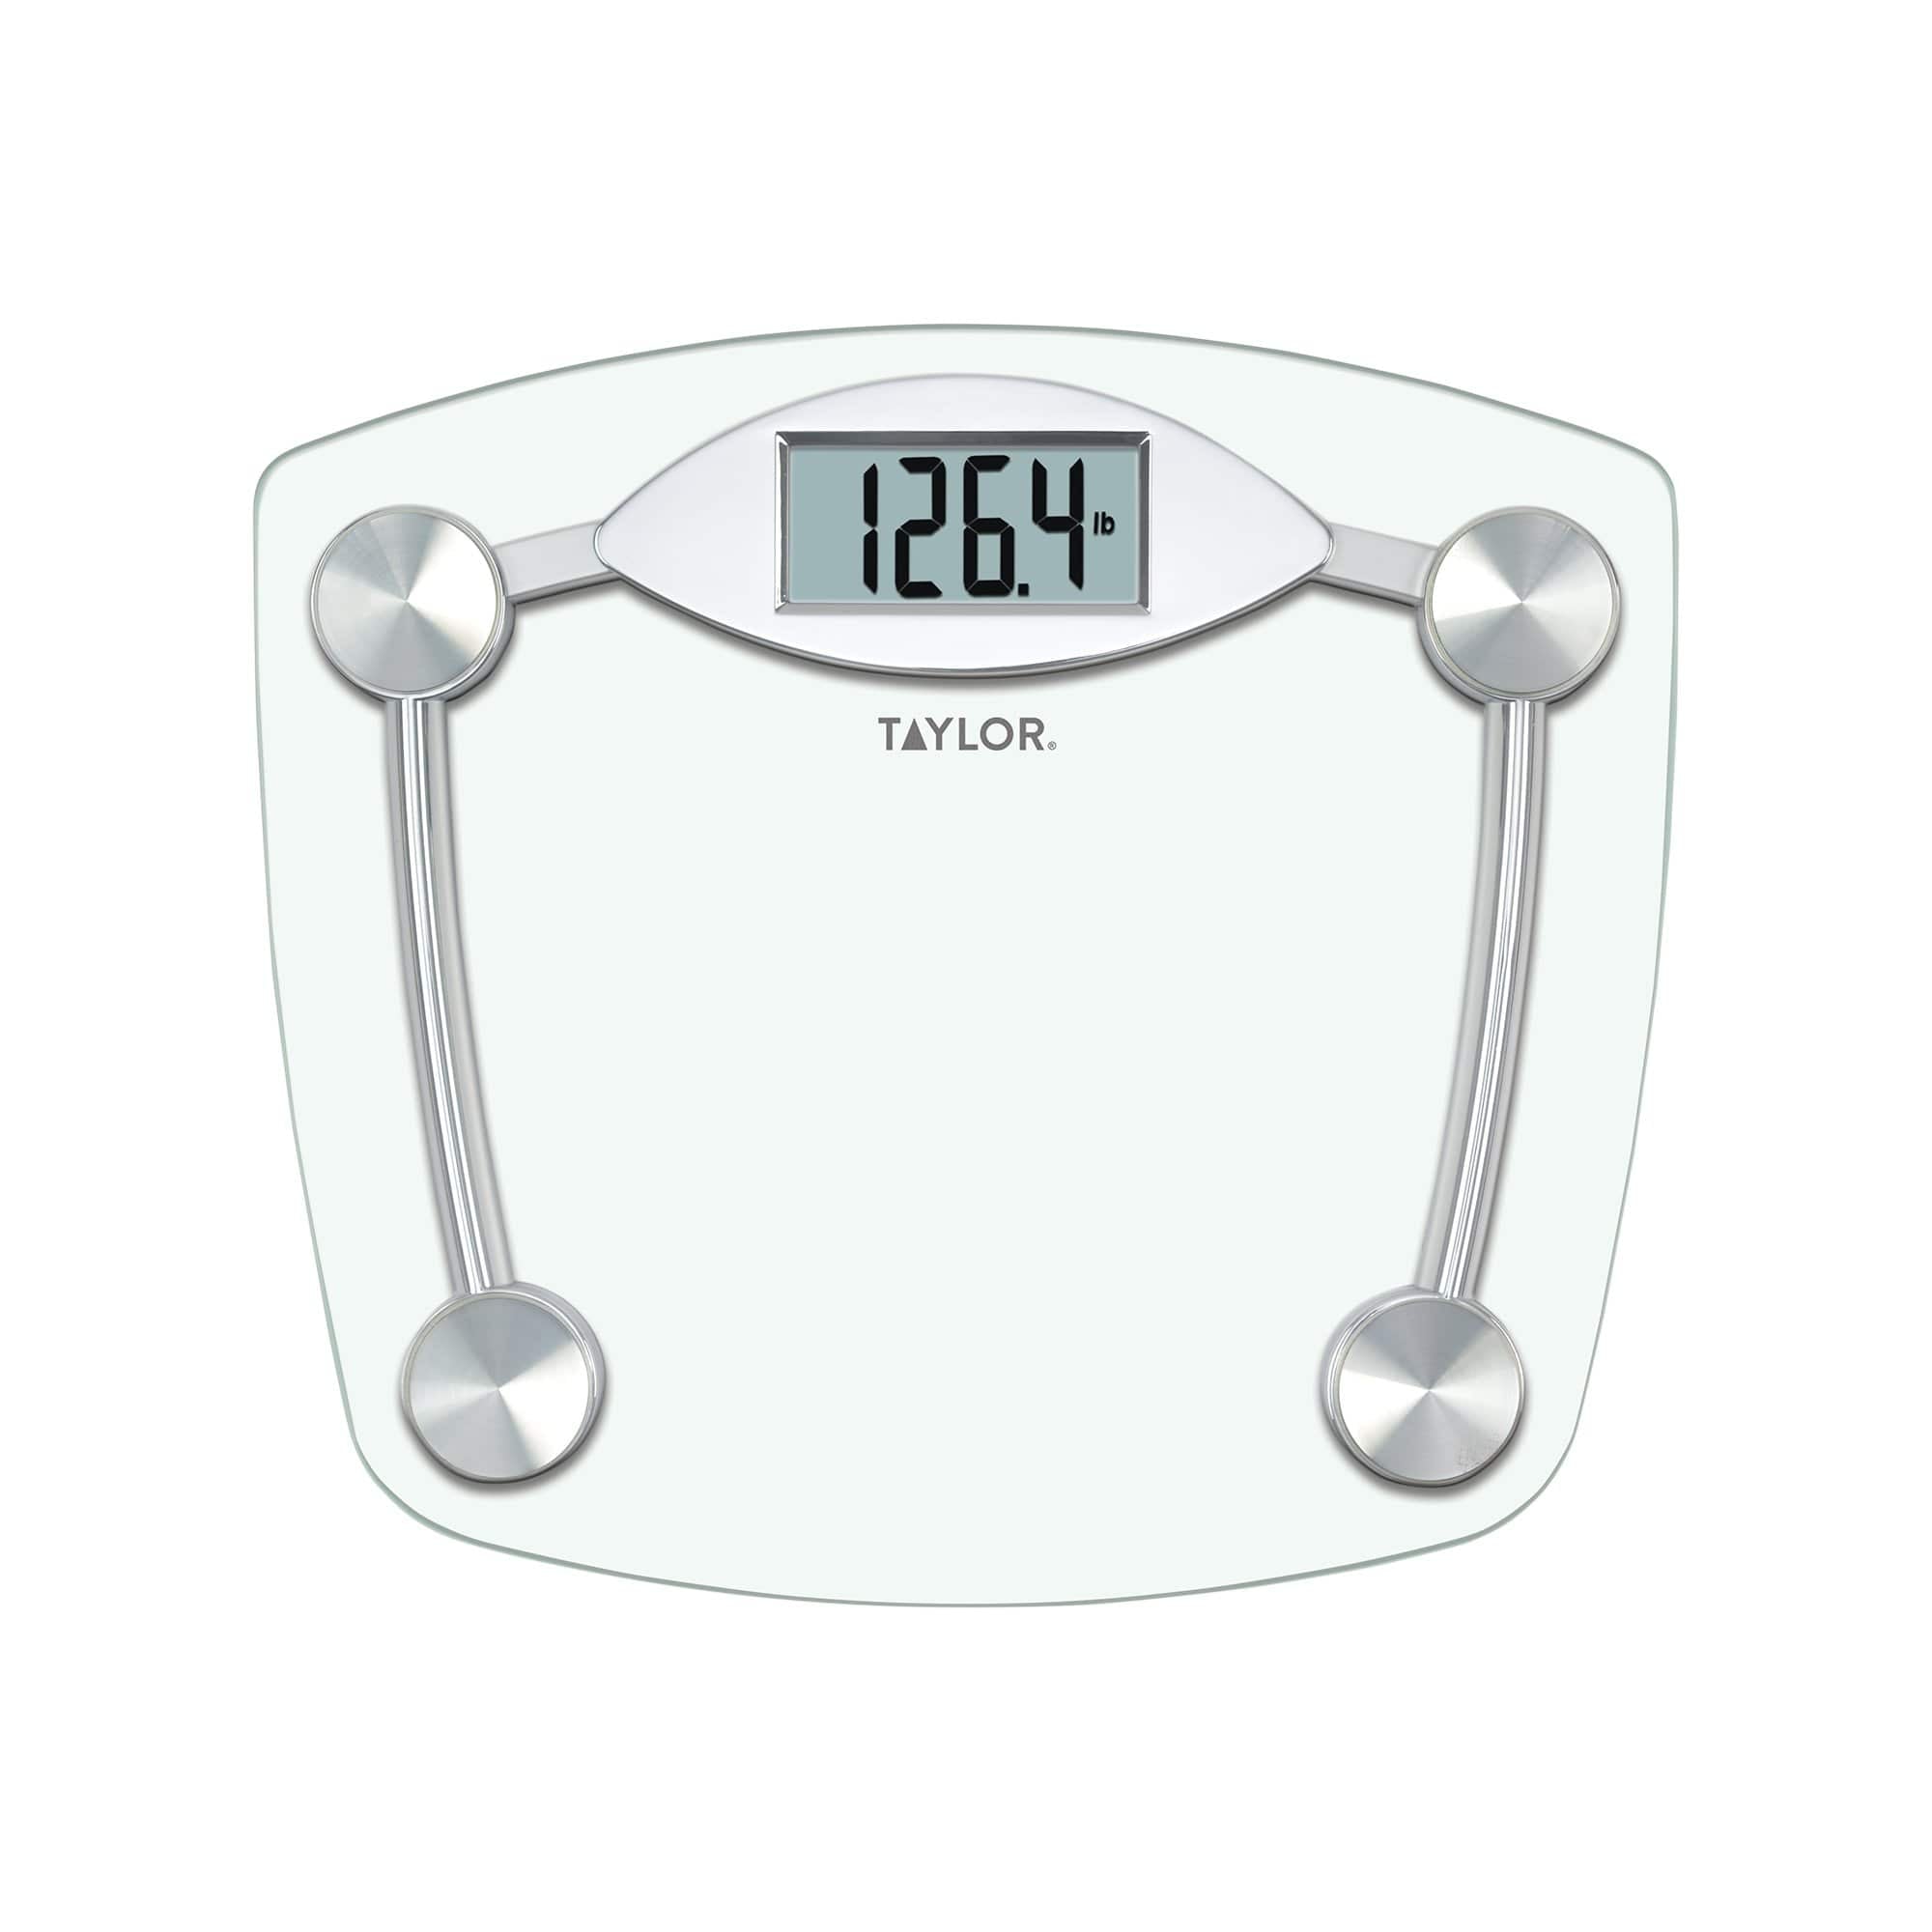 Taylor Compact Digital Scale (White), 11 pound capacity